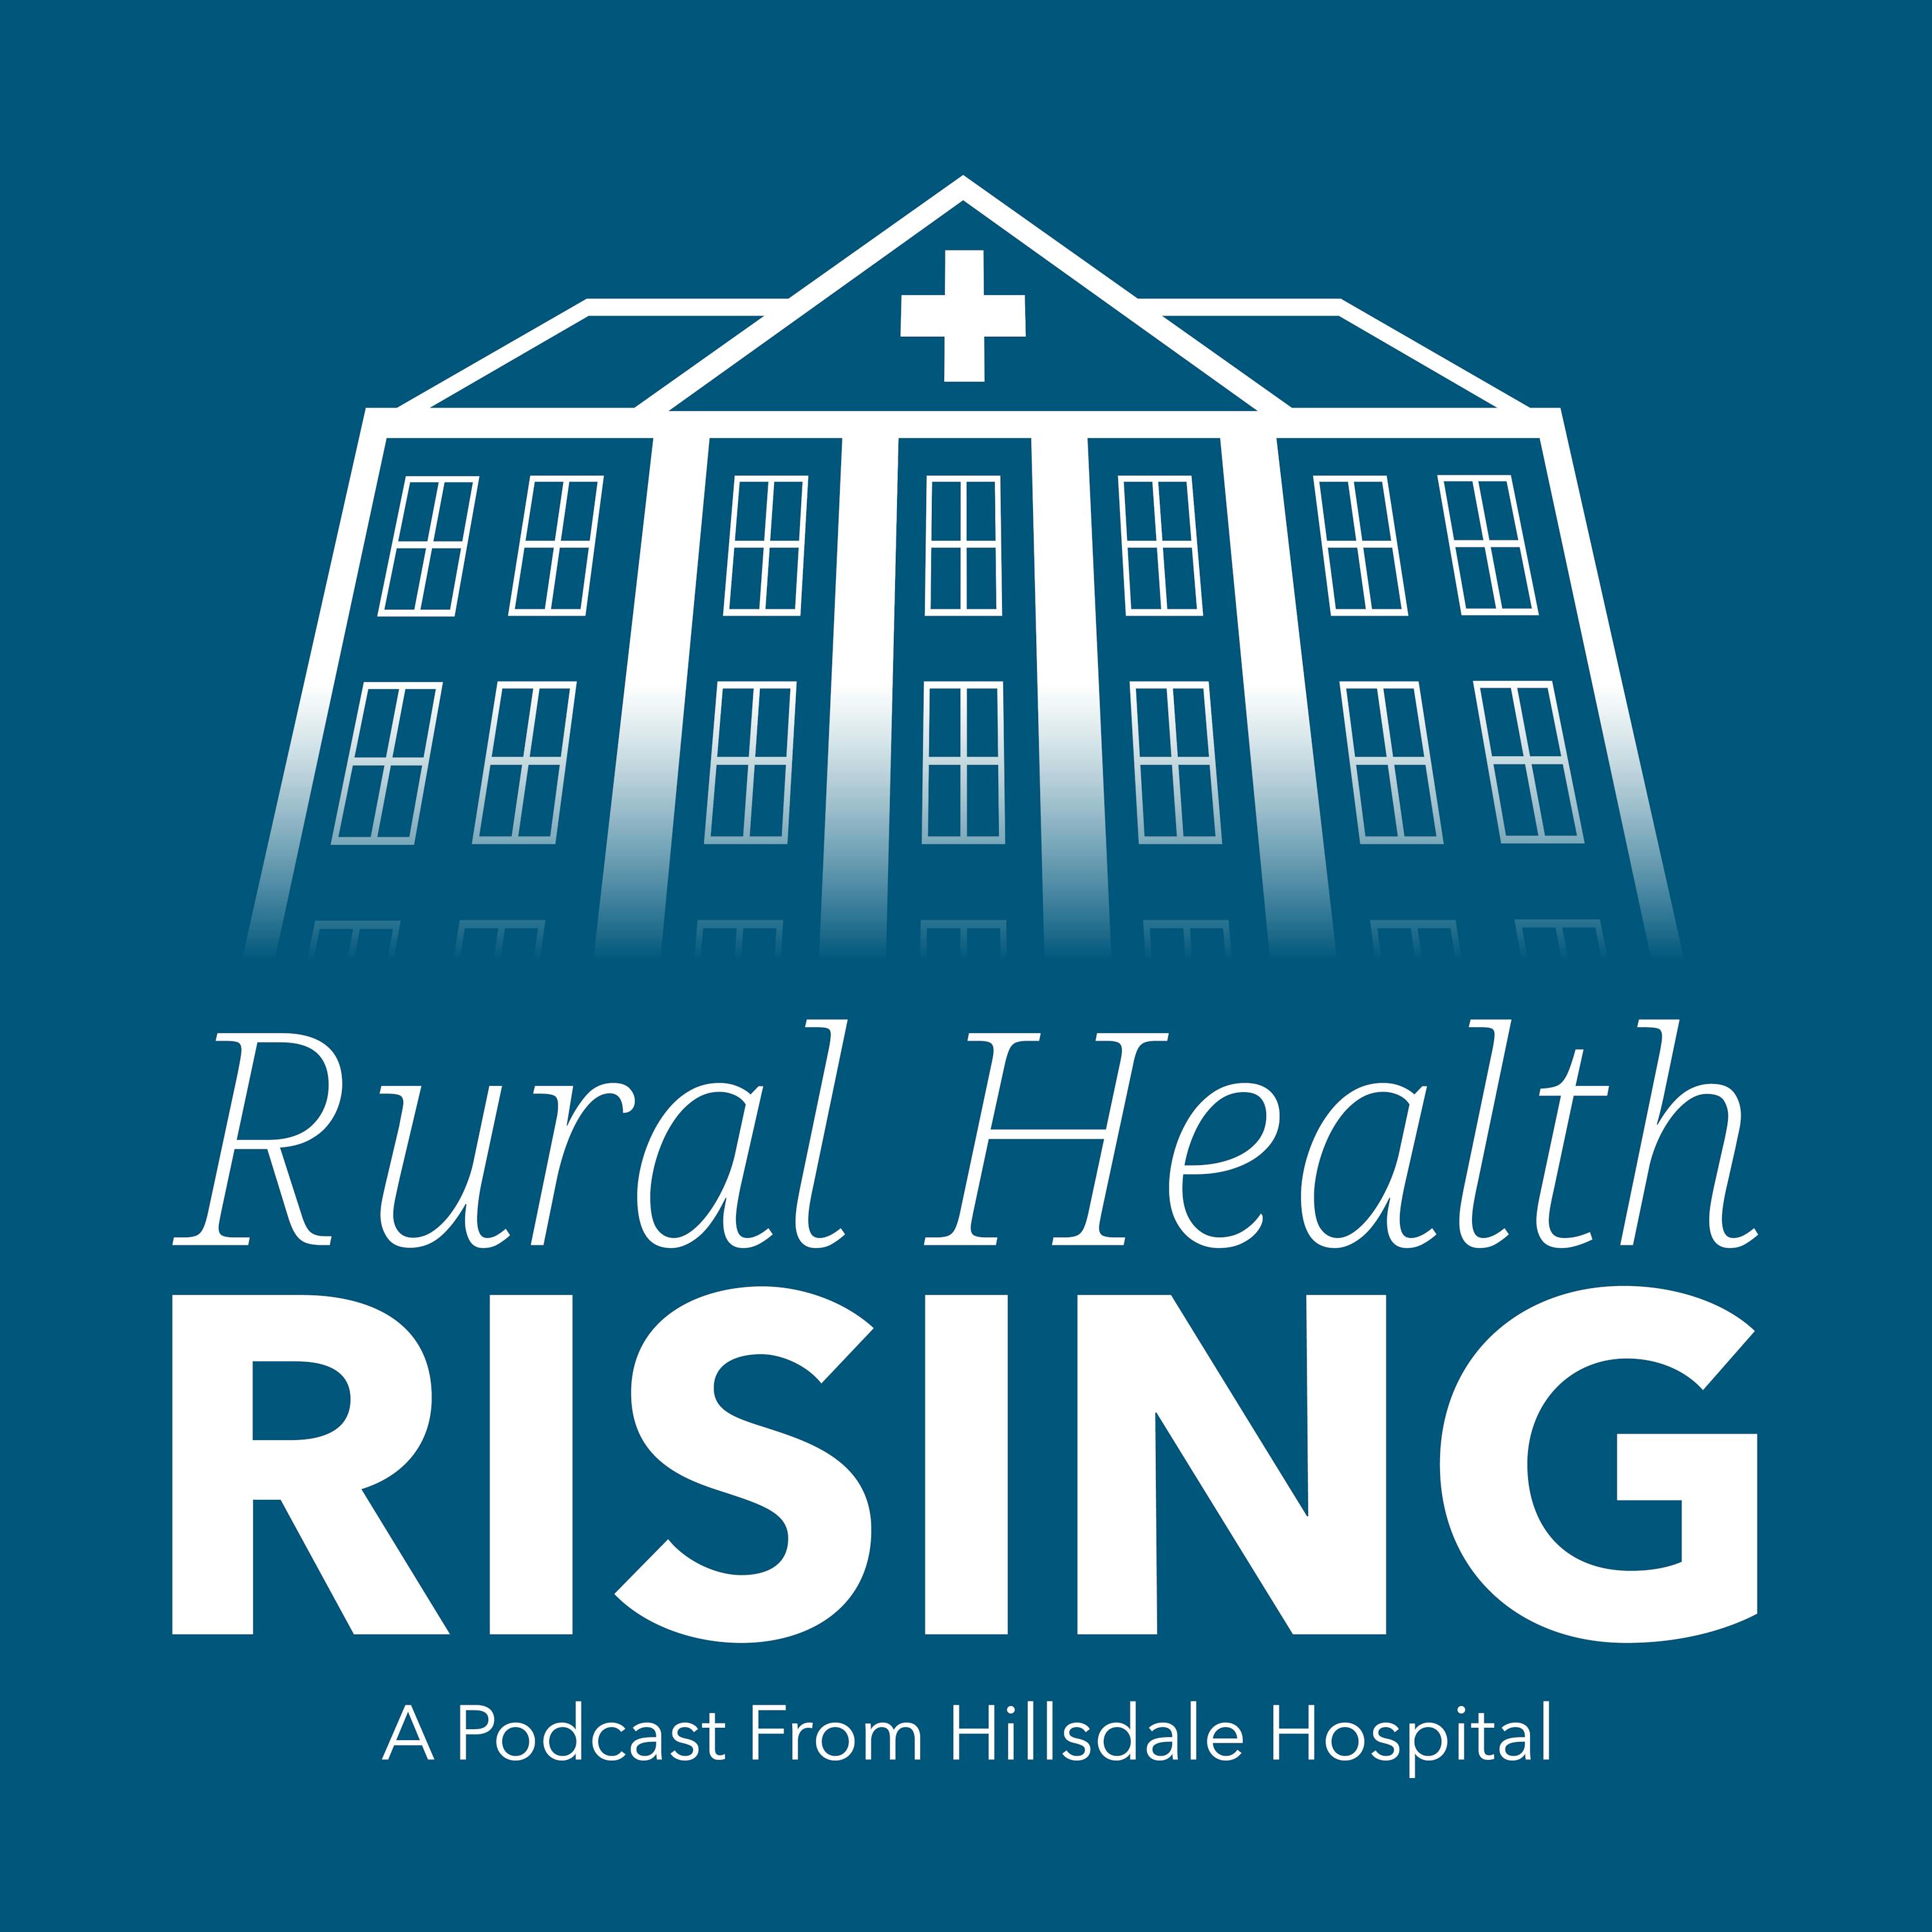 Episode 104: Getting Patients from the ER to the Floor